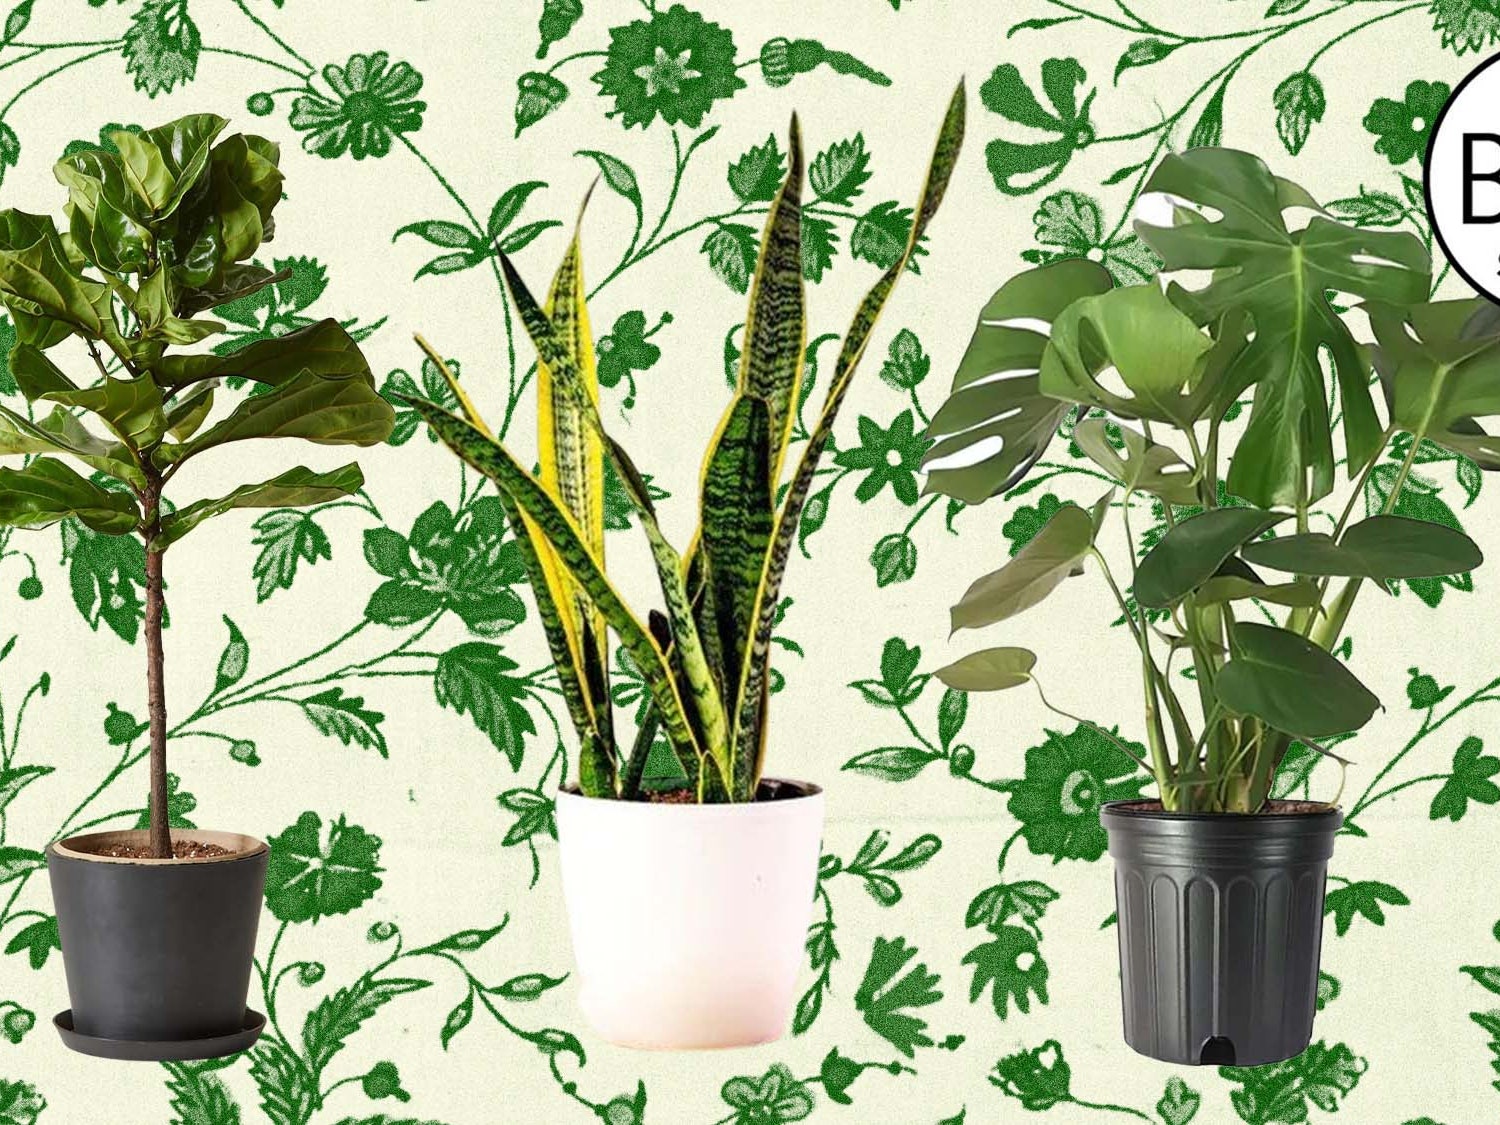 How to Choose and Cultivate Greenery in Your Home Like a Plant Pro